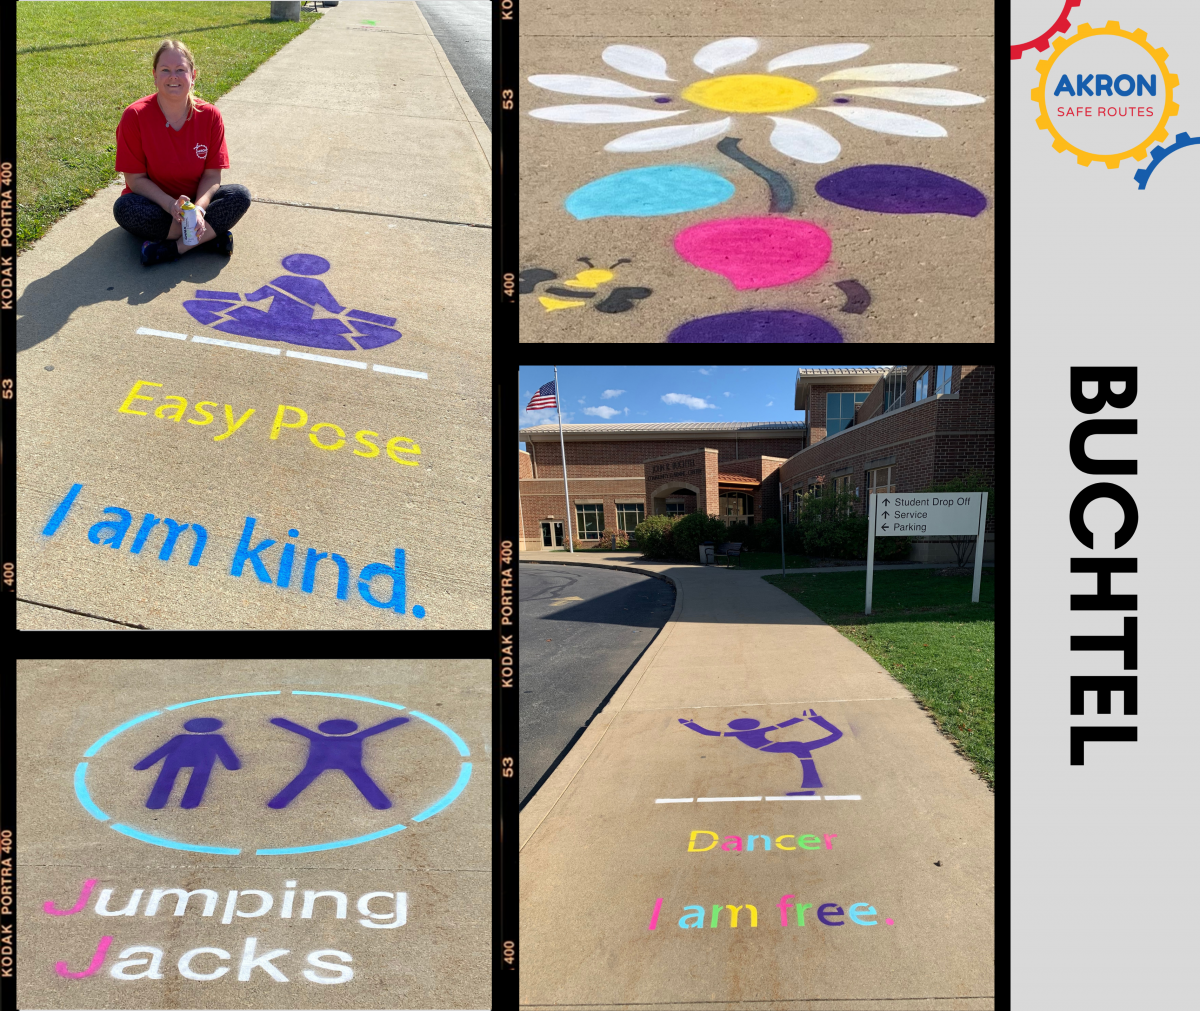 Image of painted activity stations, yoga poses, hopscotch, and wayfinding animal prints on the sidewalks